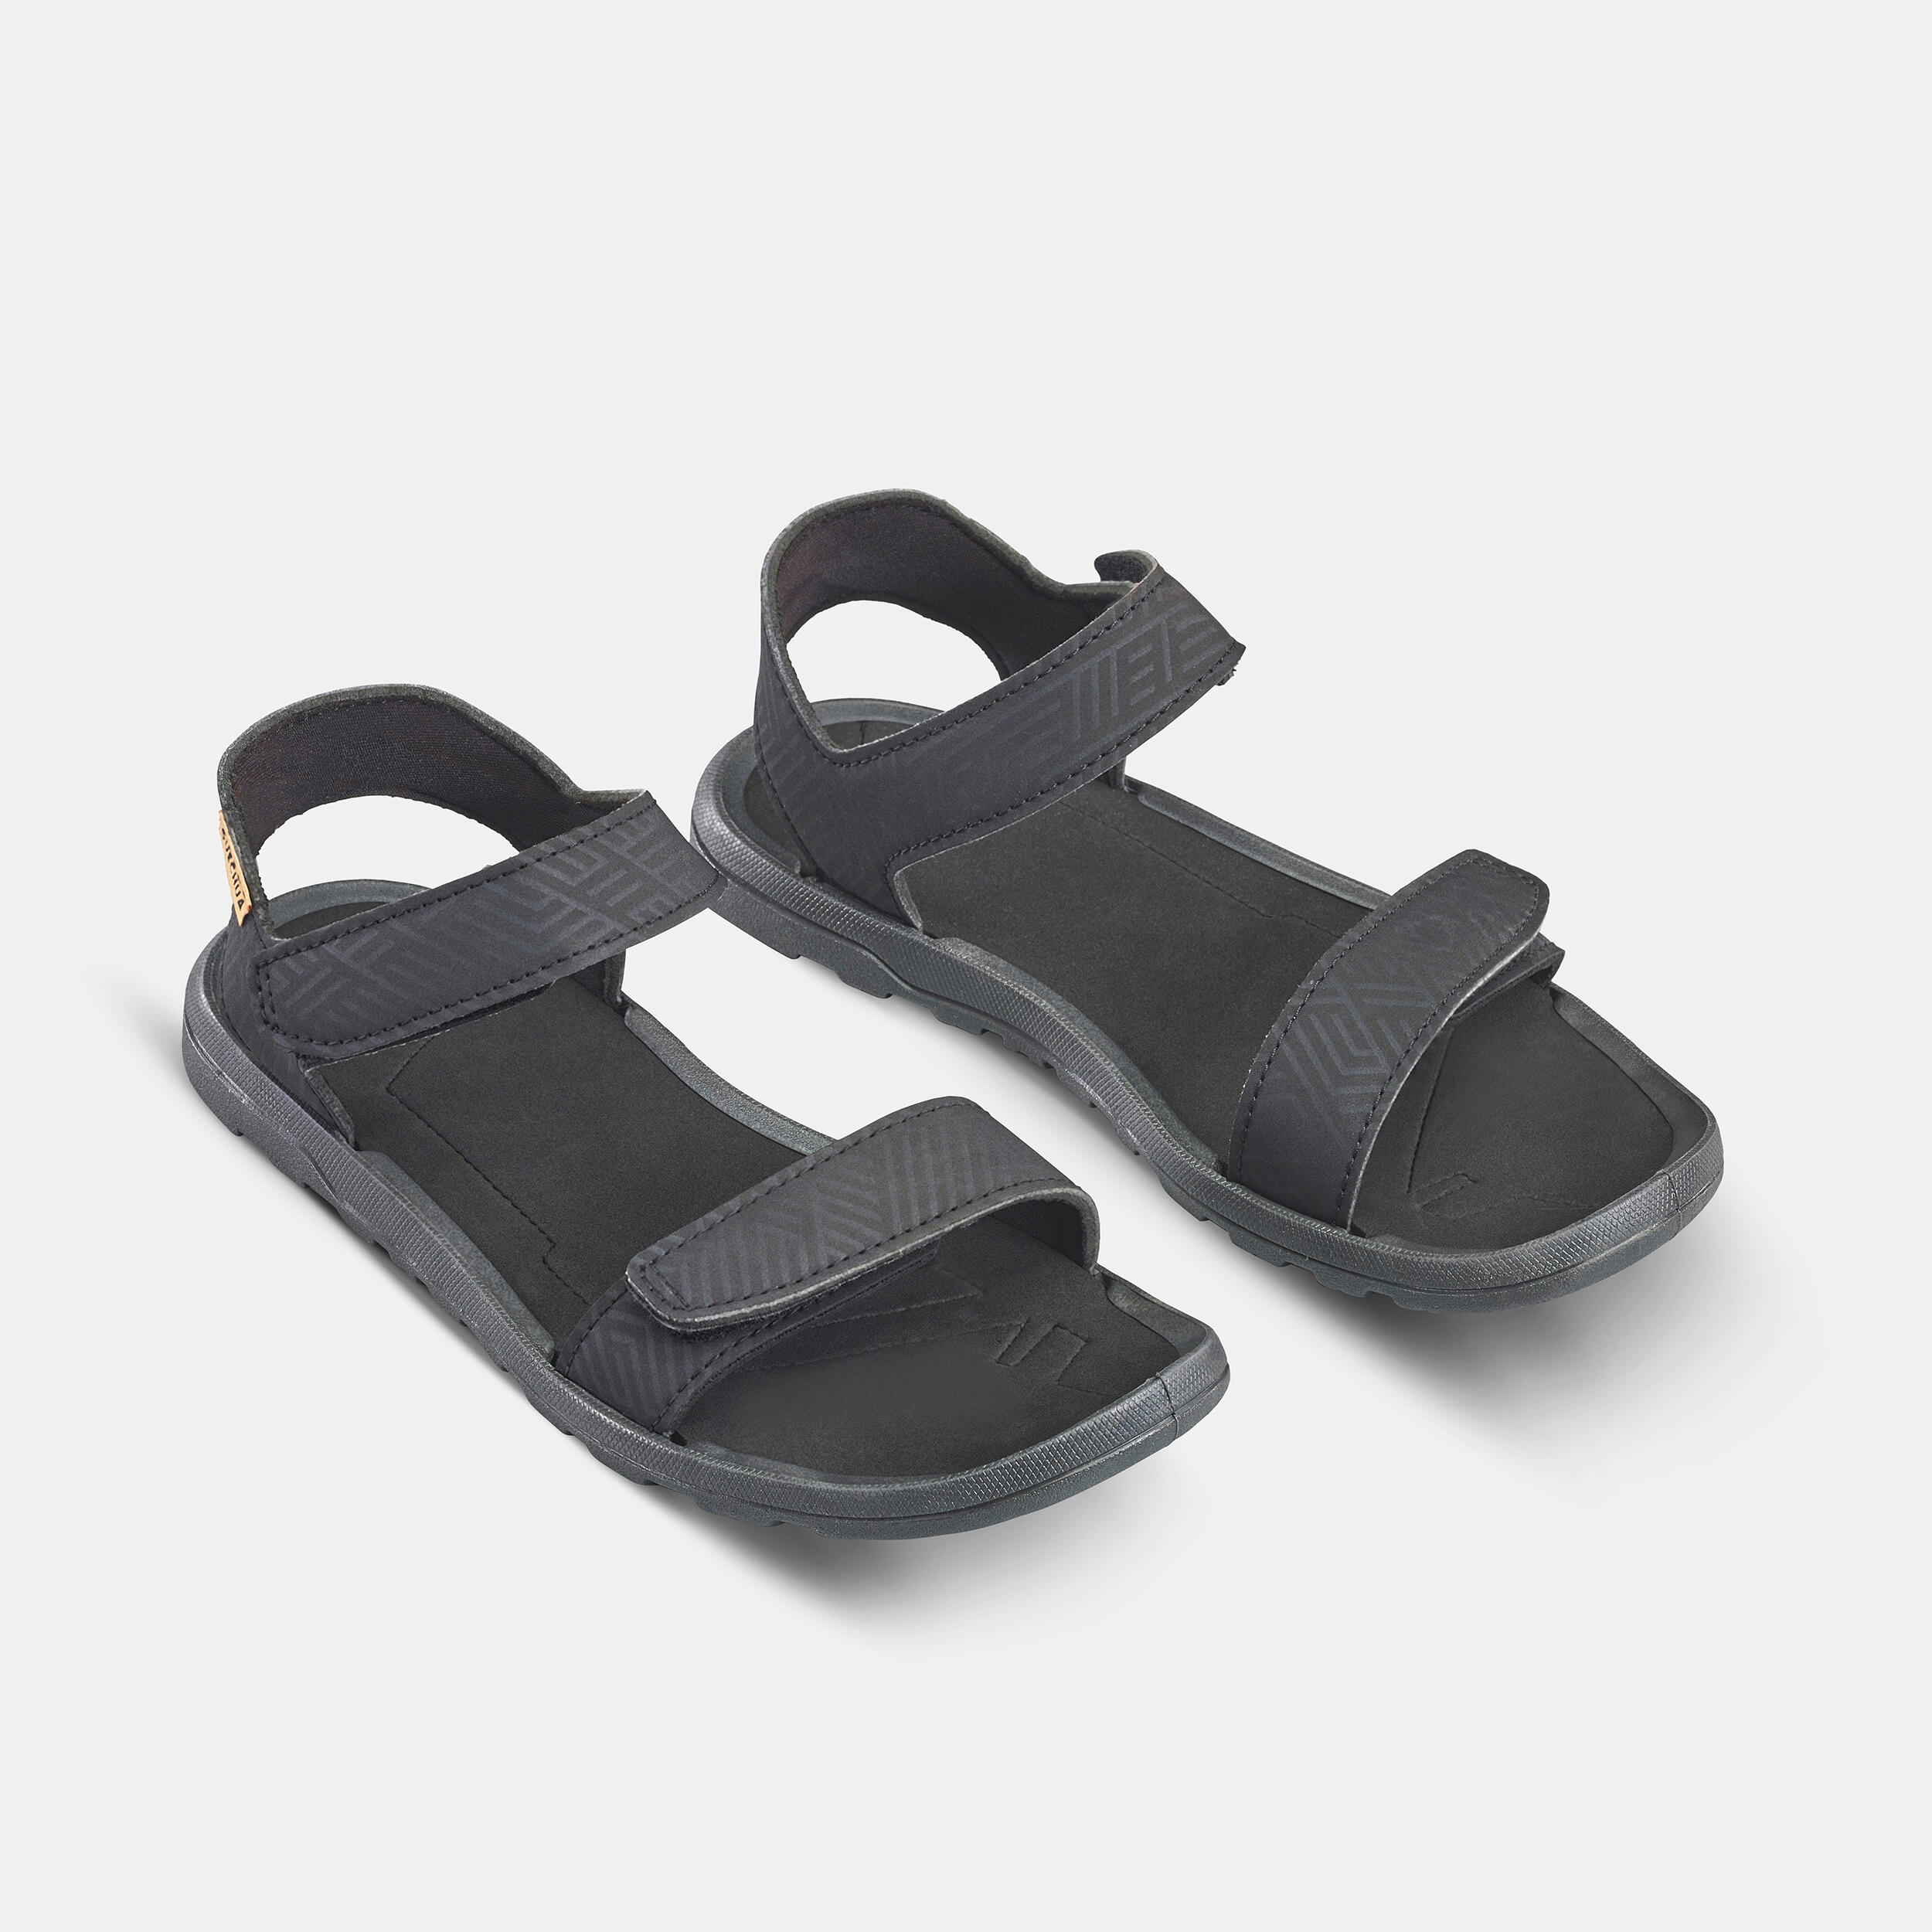 Women’s Post-Hiking Sandals Ecocamp 4/9